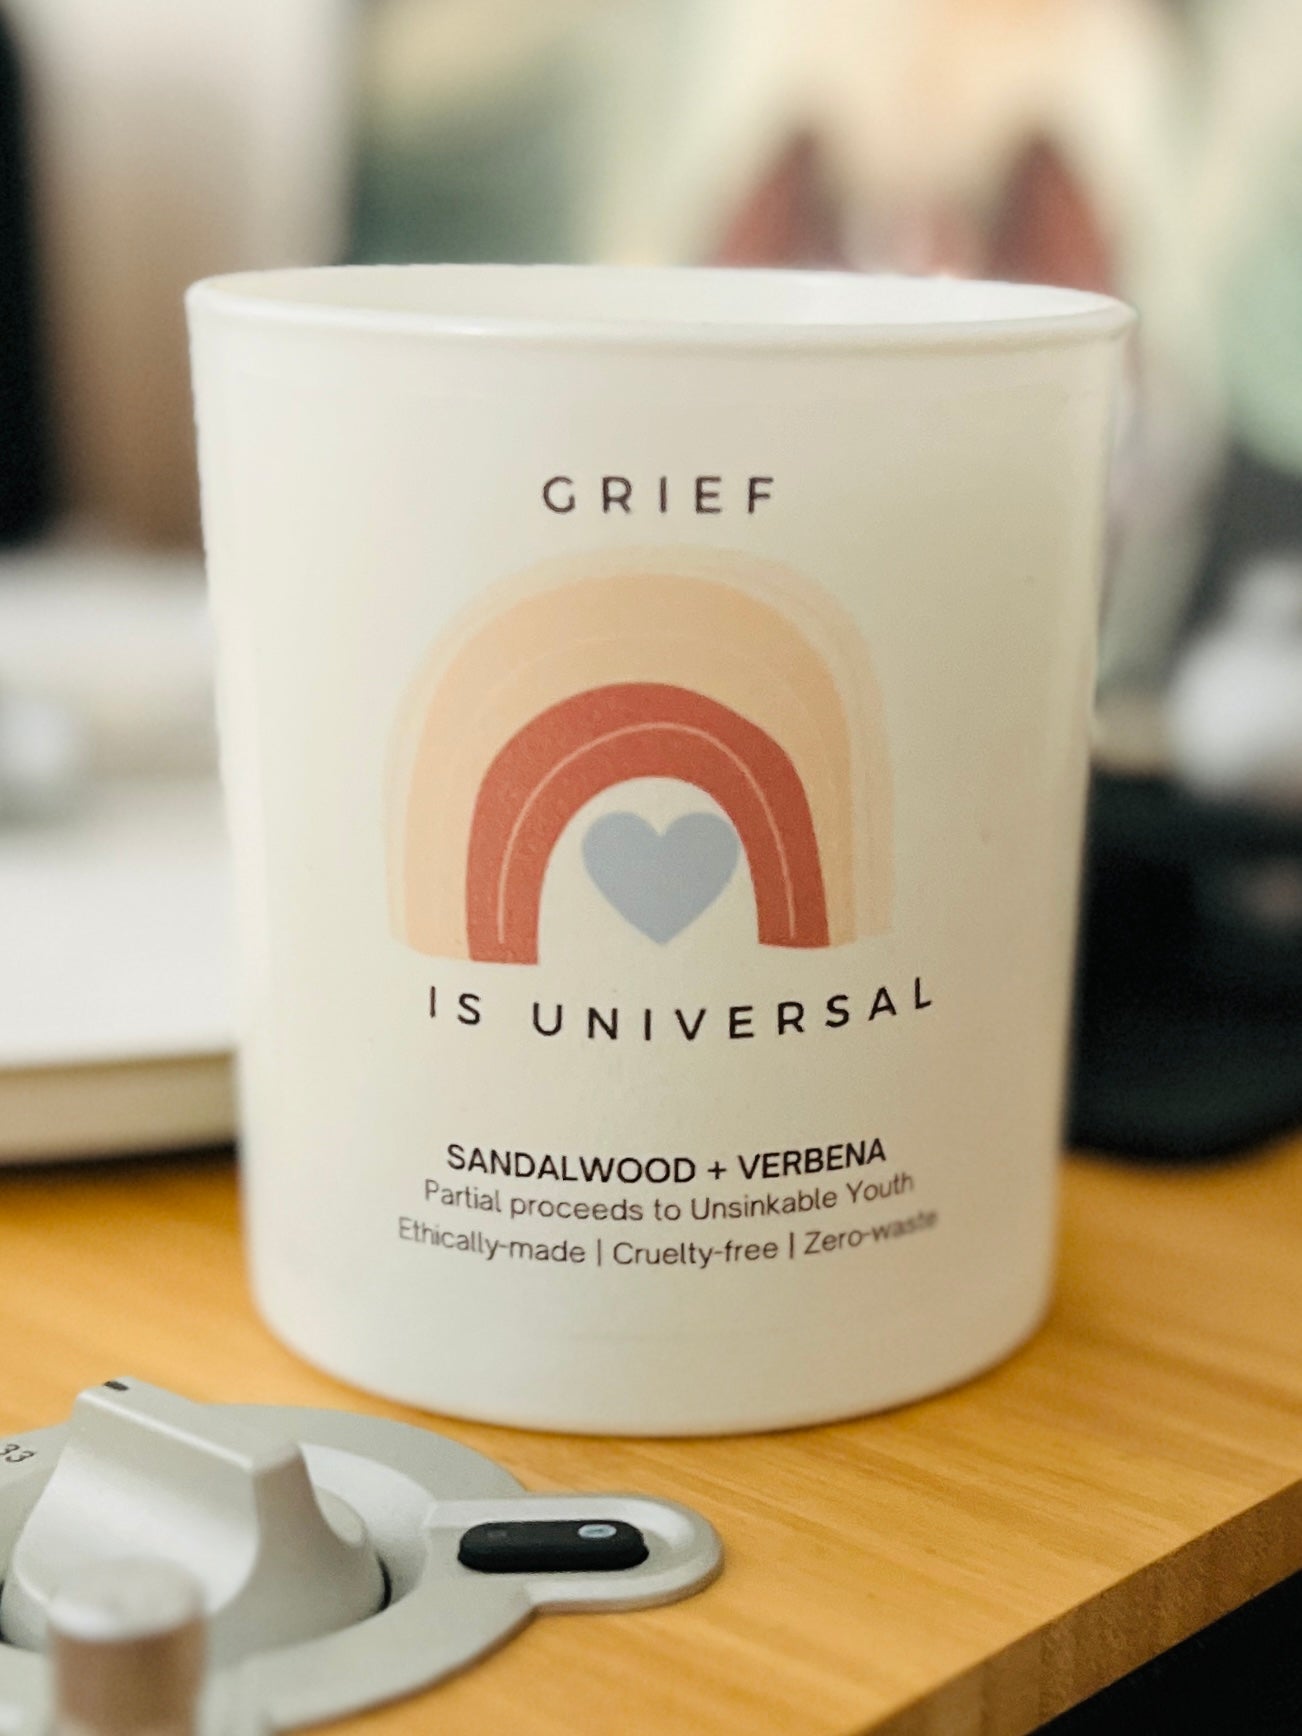 The Grief Candle